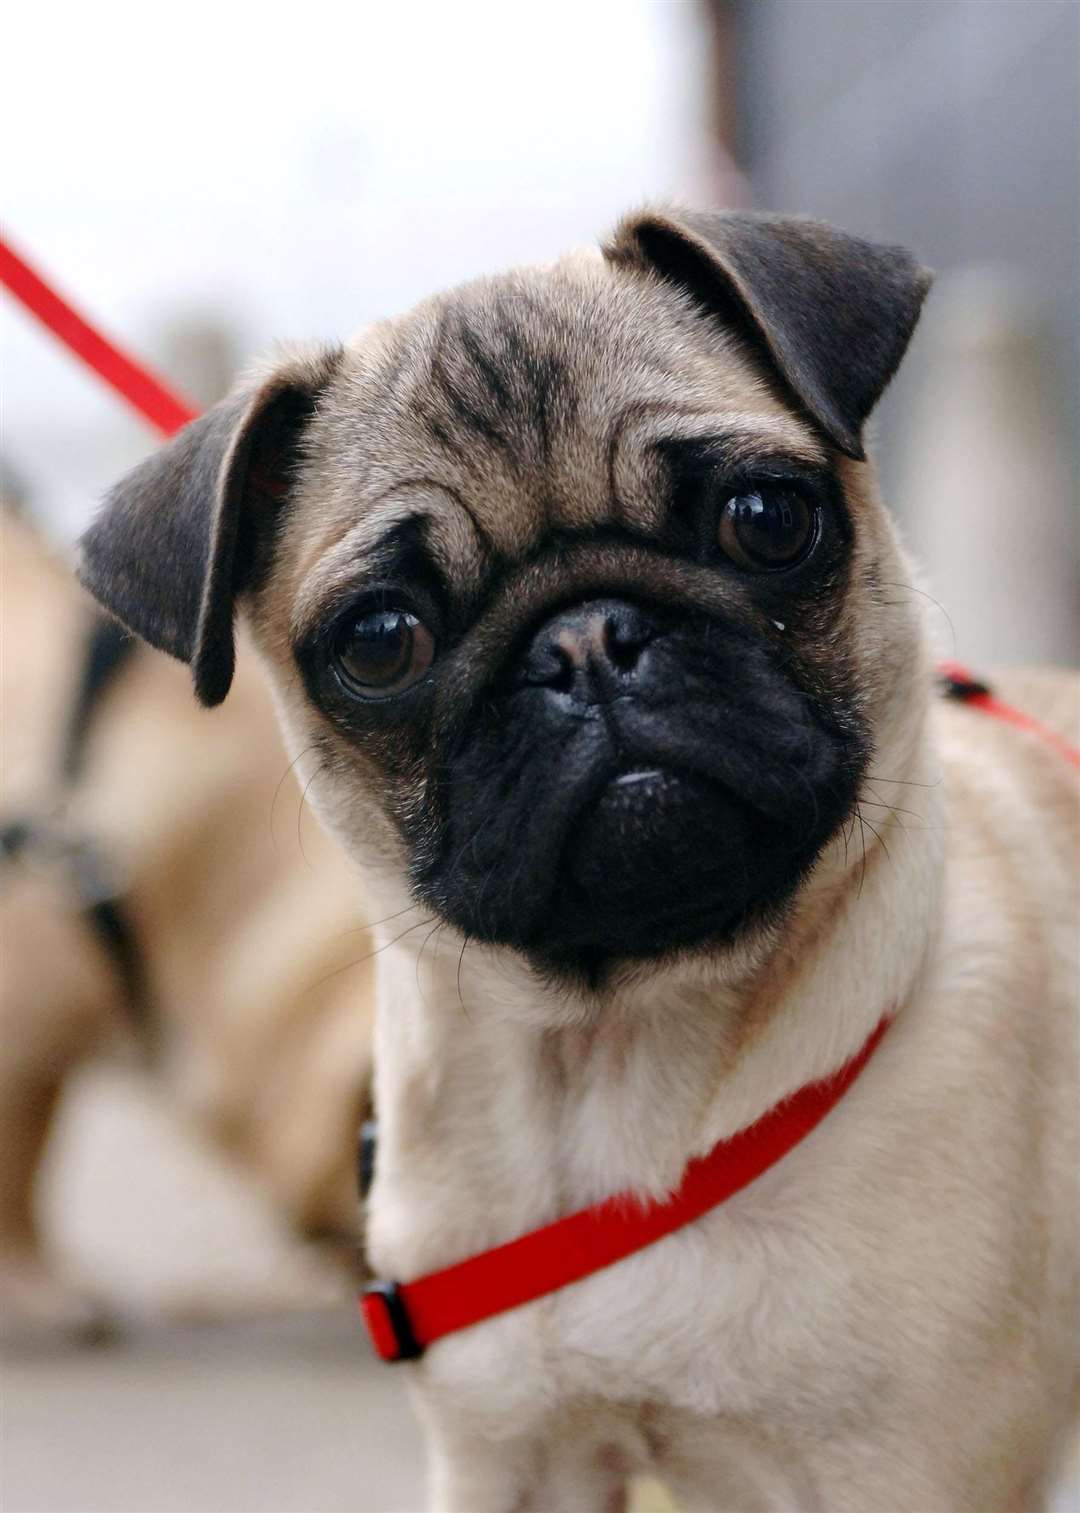 From 2005 to 2017 there was a five five-fold increase in Kennel Club registrations of pugs (Clara Molden/PA)